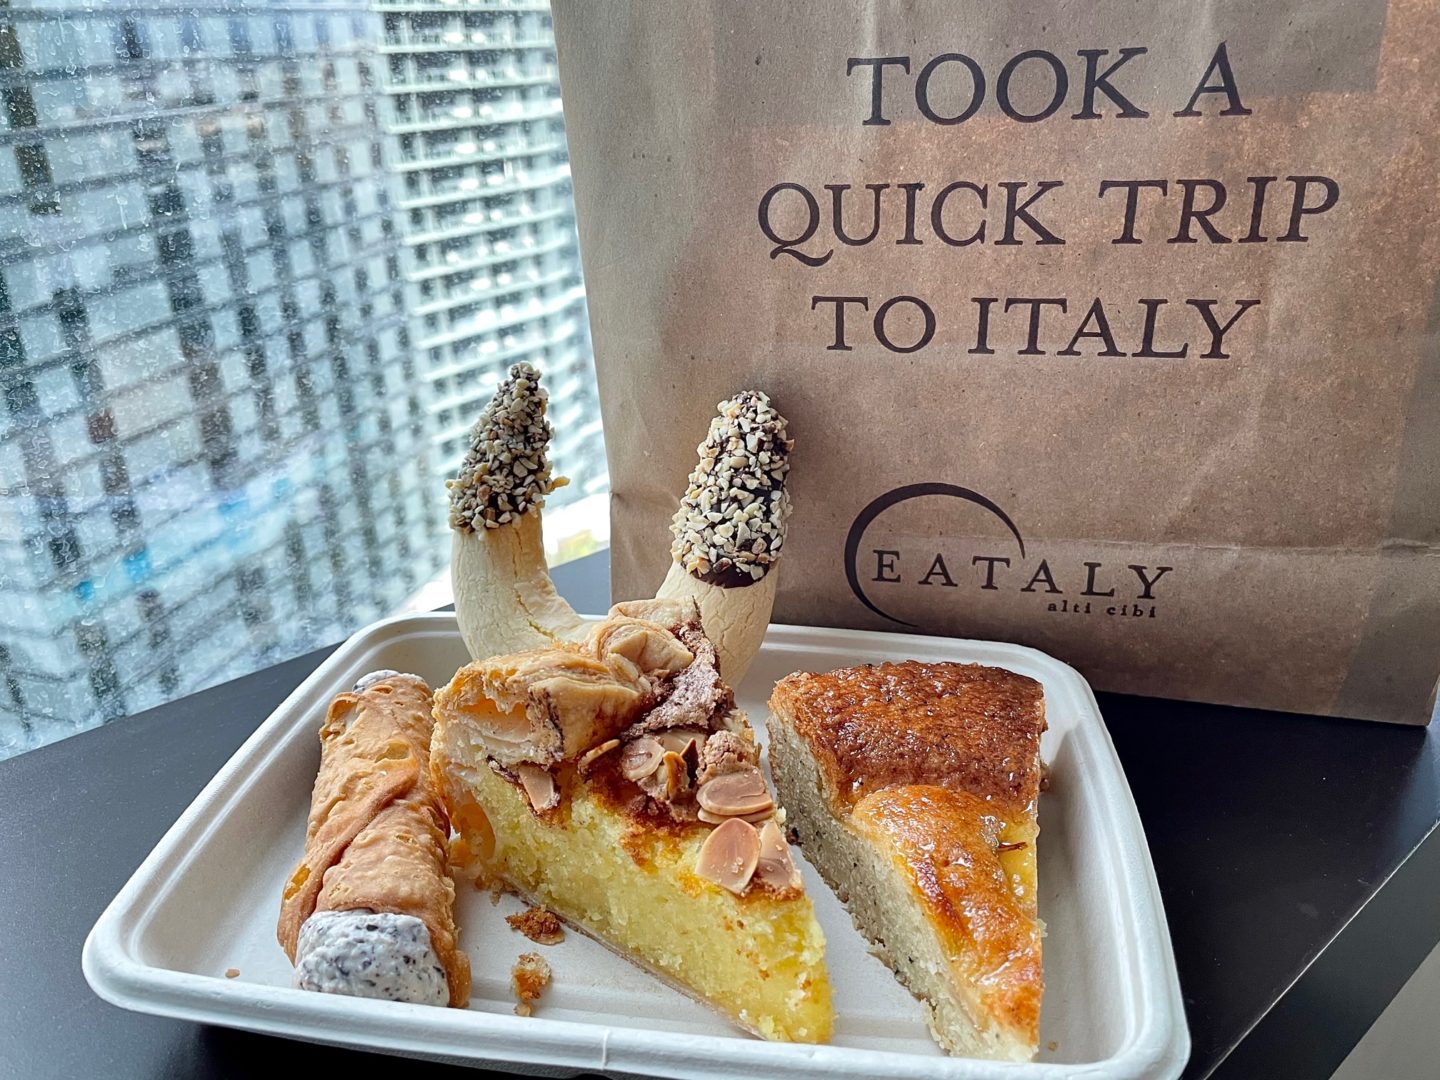 Desserts from Eataly Las Vegas